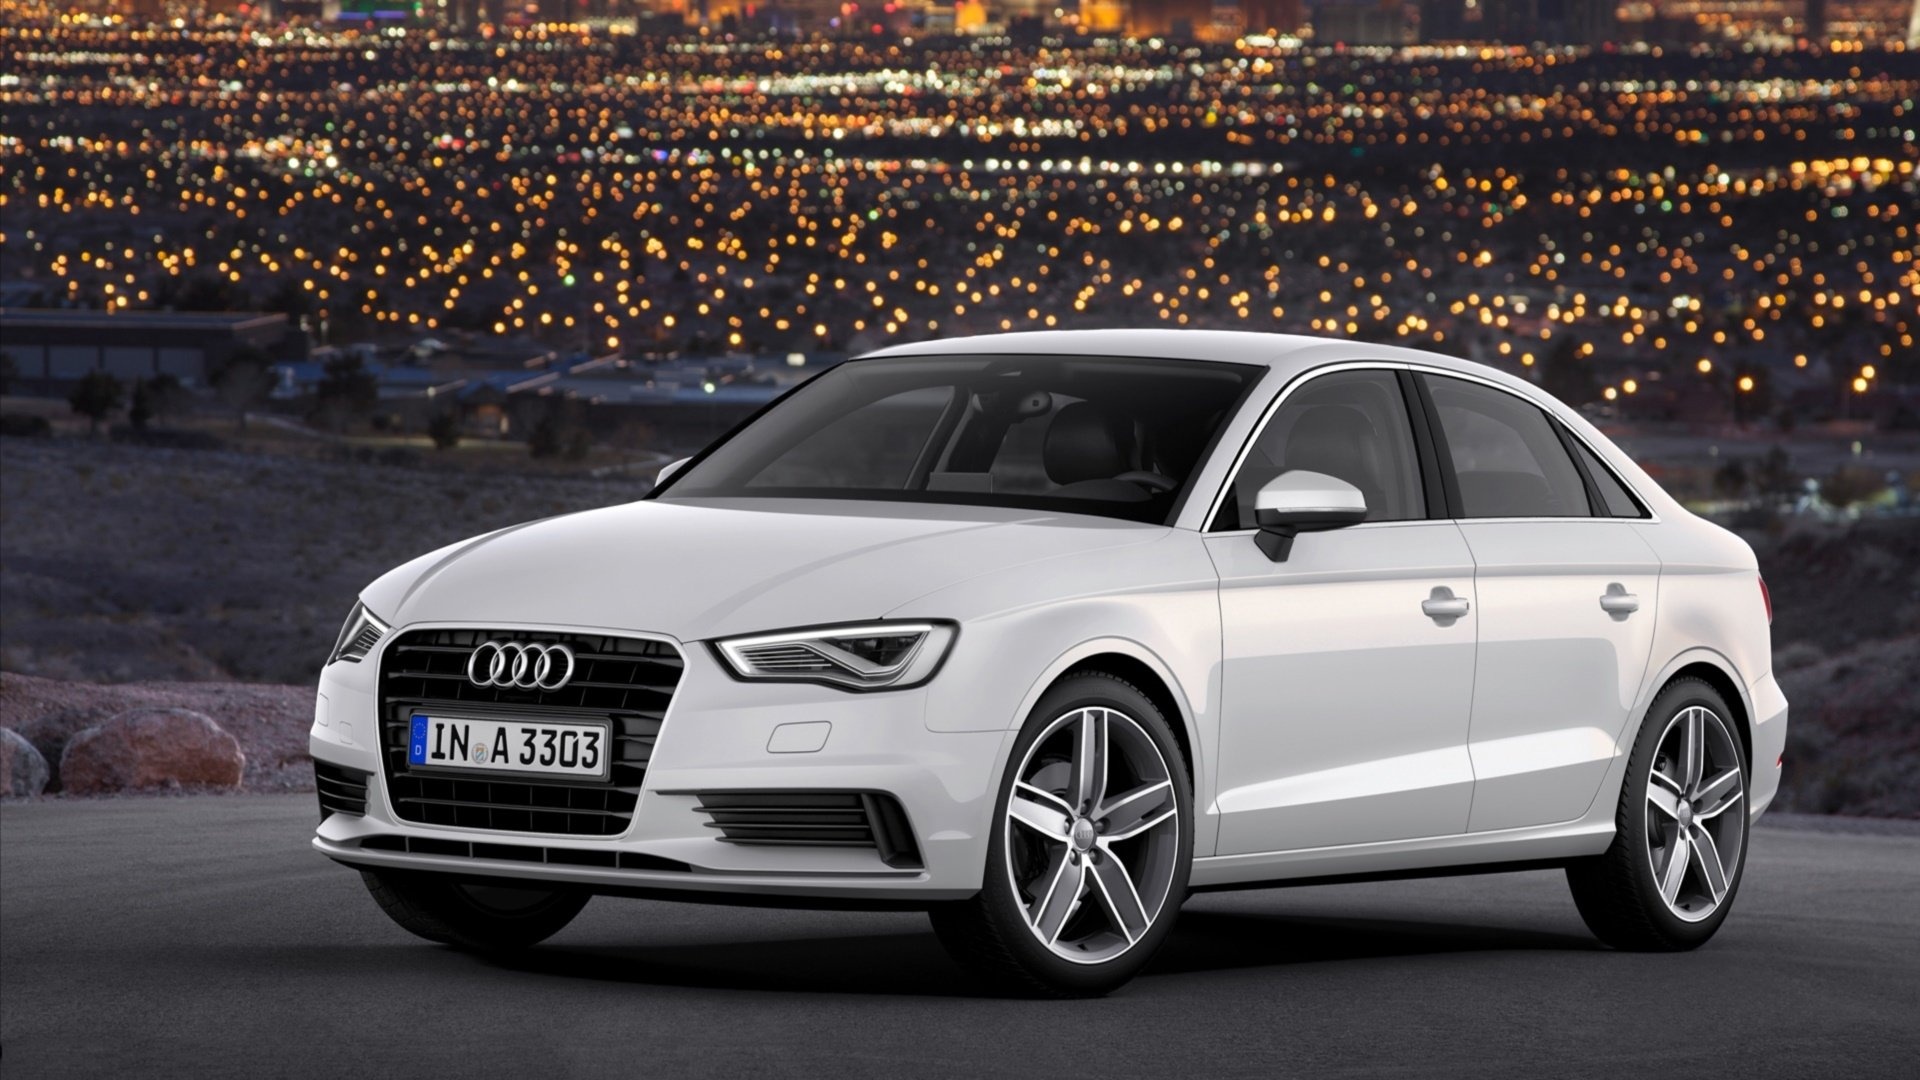 Audi A3, HD wallpapers, Background images, Page 2, 1920x1080 Full HD Desktop